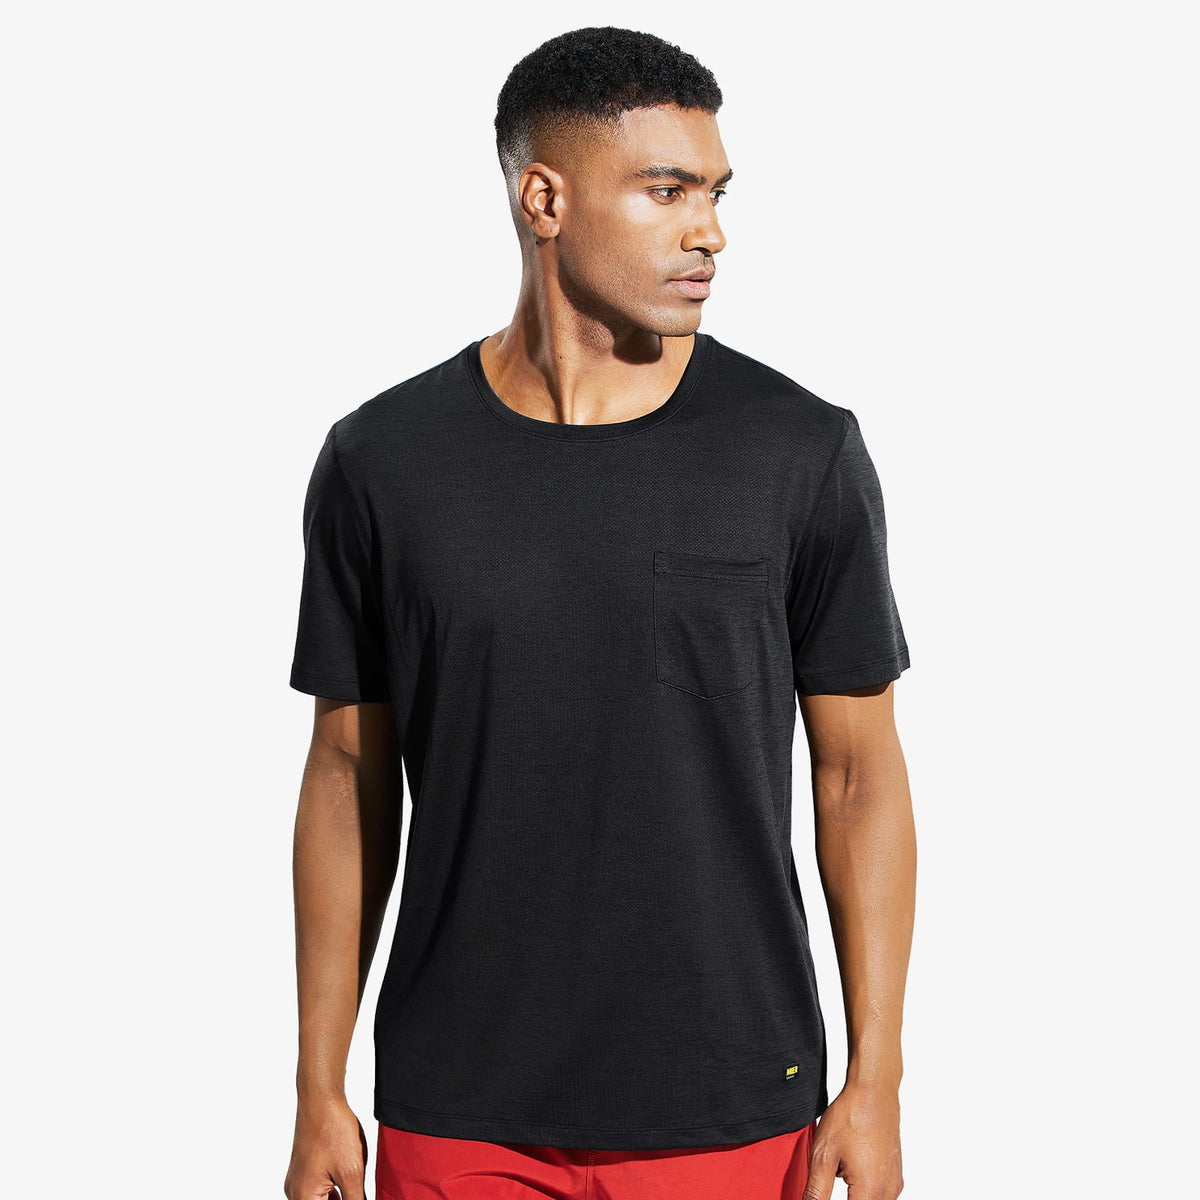 MIER Men's Dry Fit Athletic T-Shirt with Pocket